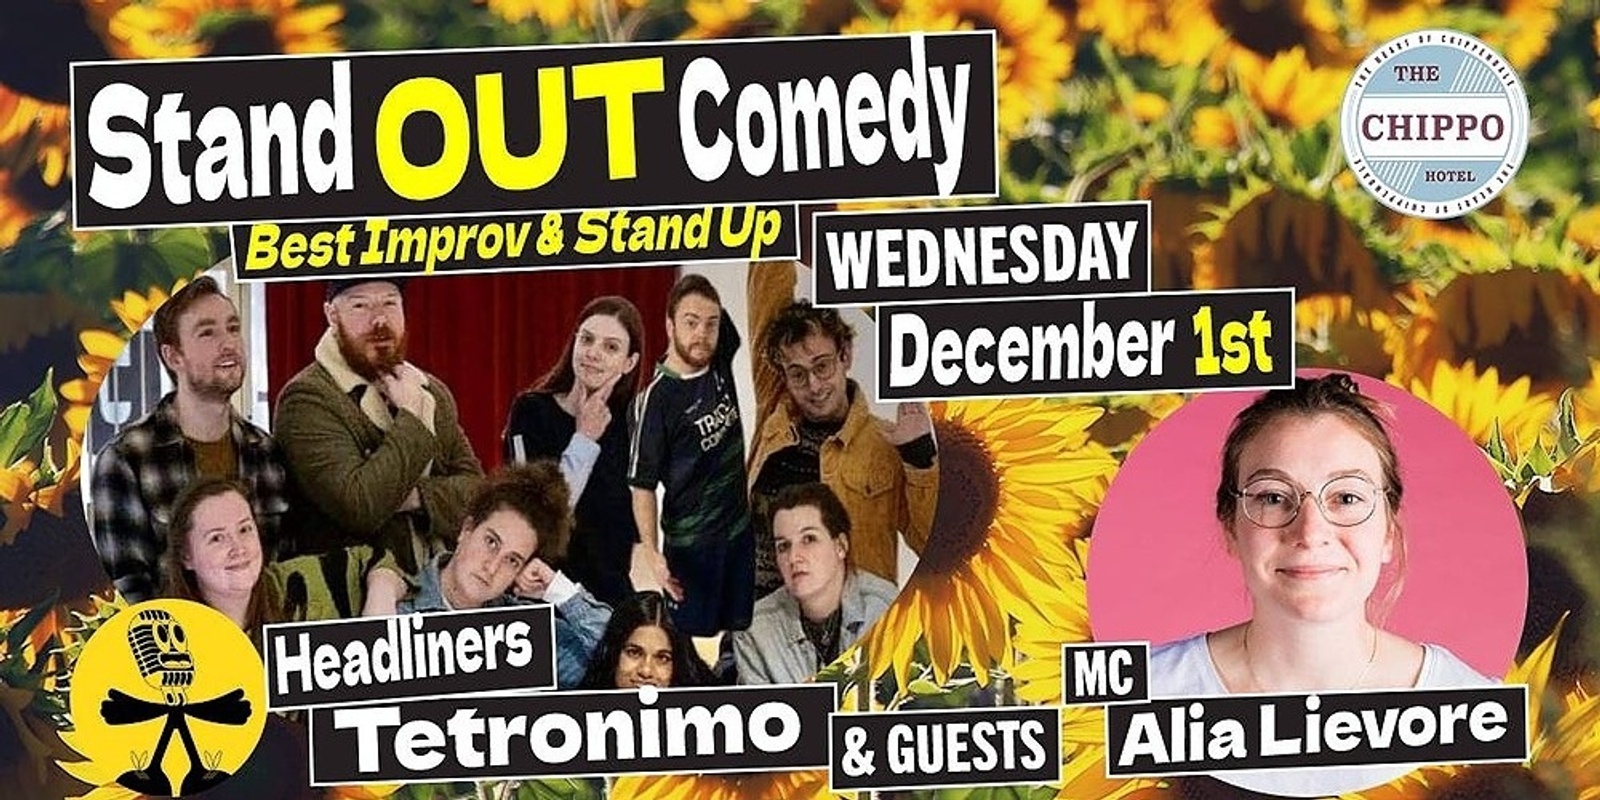 Banner image for Stand OUT Comedy:  Alia Lievore